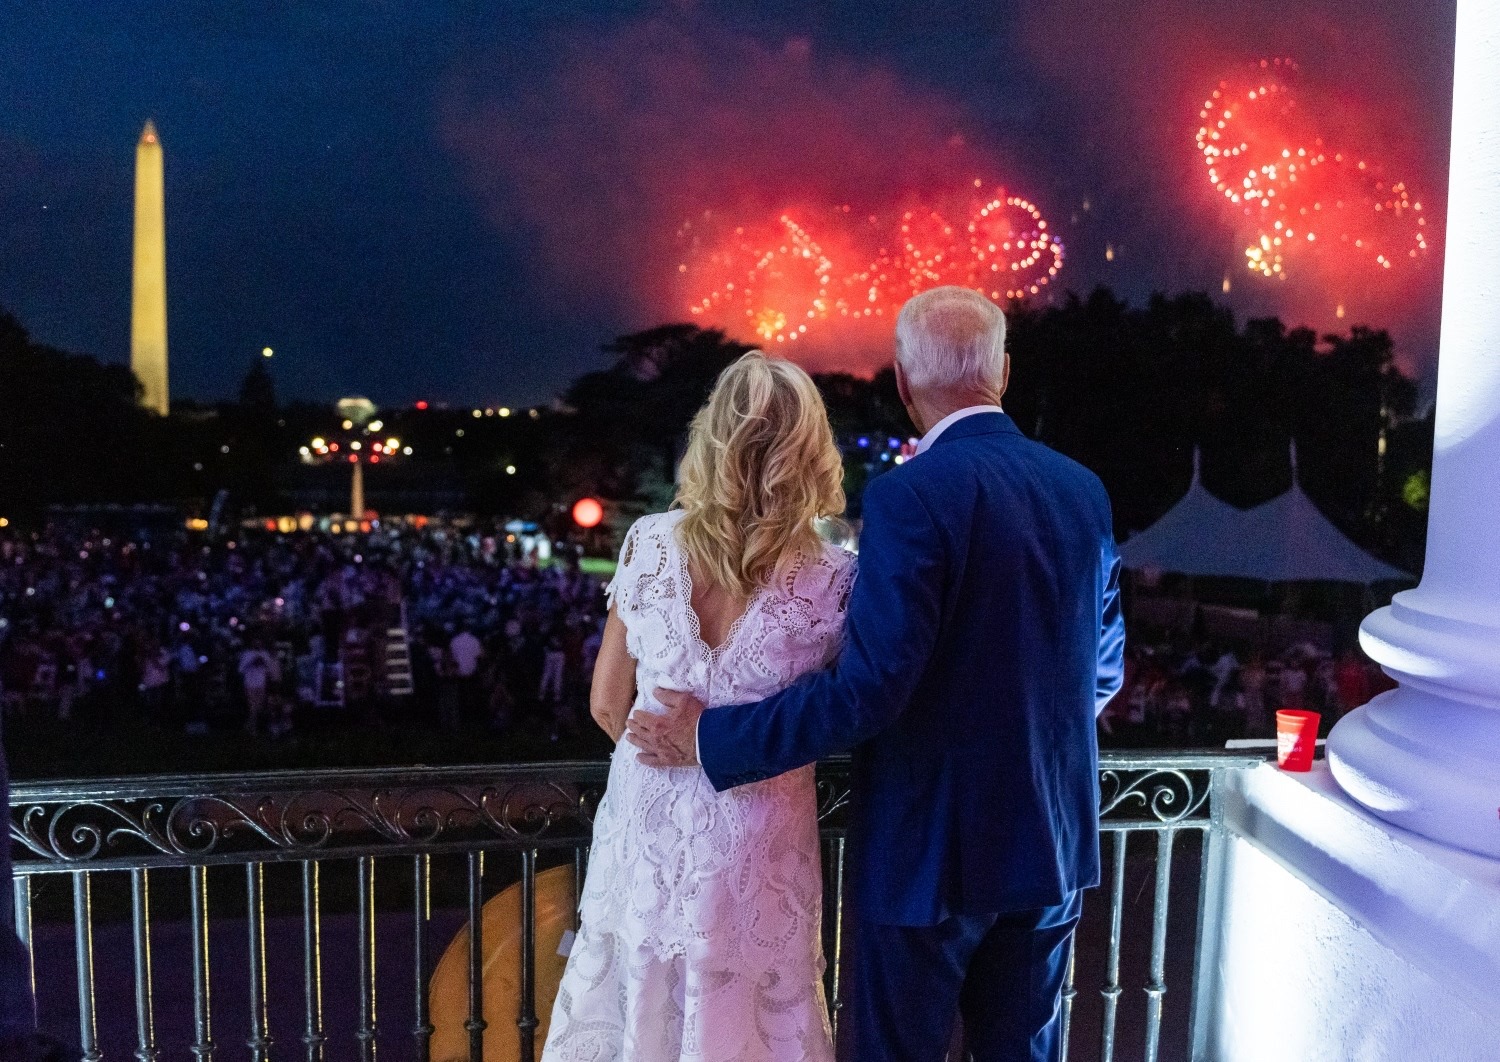 Joe Biden and Jill Biden watch fireworks bursting over the National Mall in Washington, D.C. to right of Washington Monument (view from the White House).